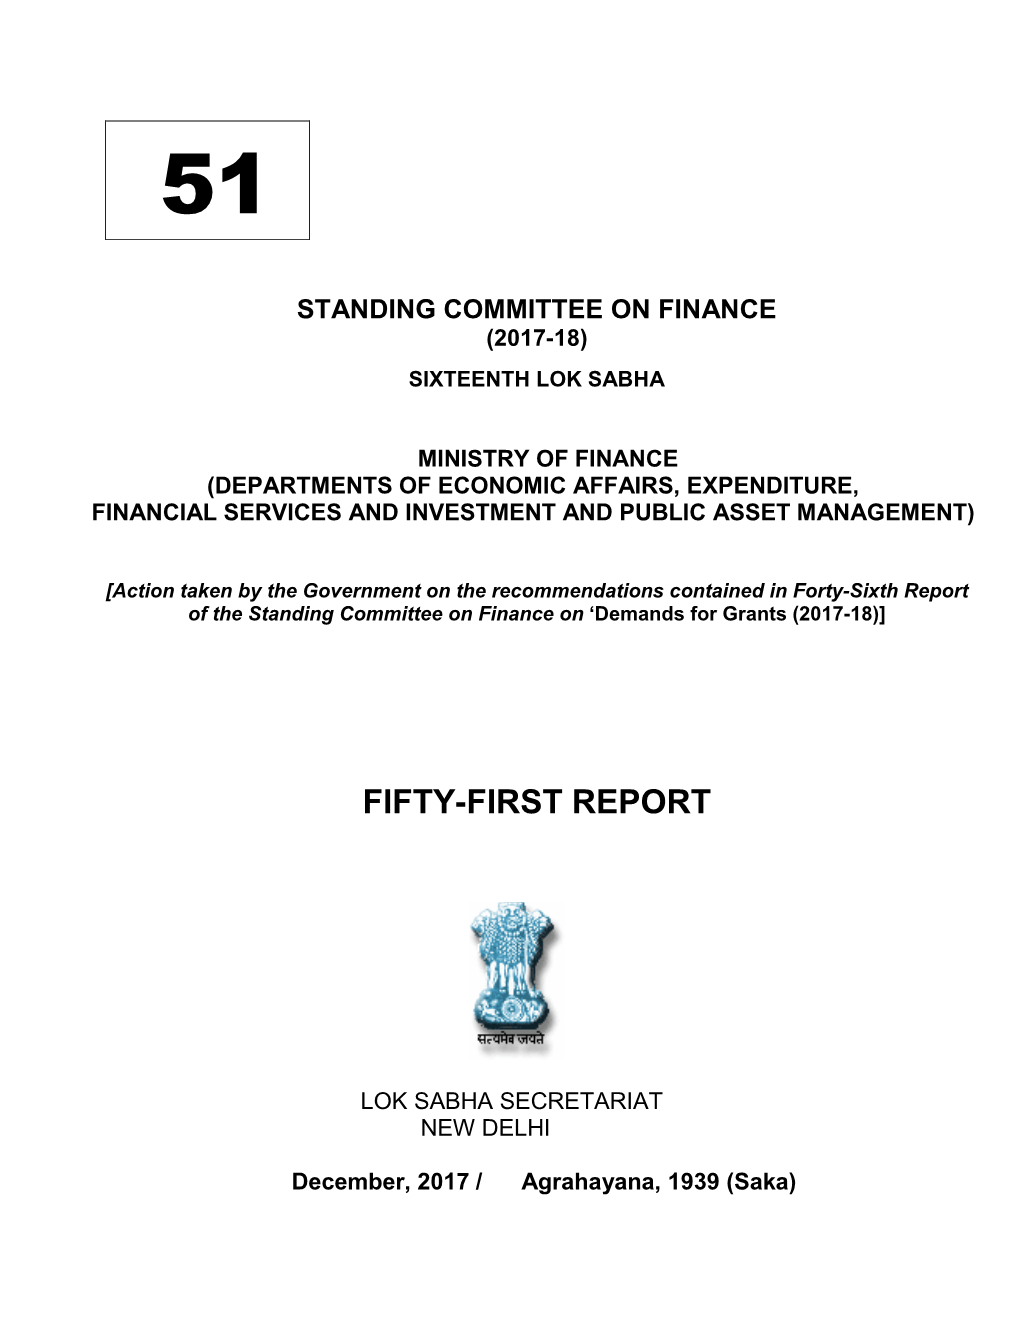 Fifty-First Report